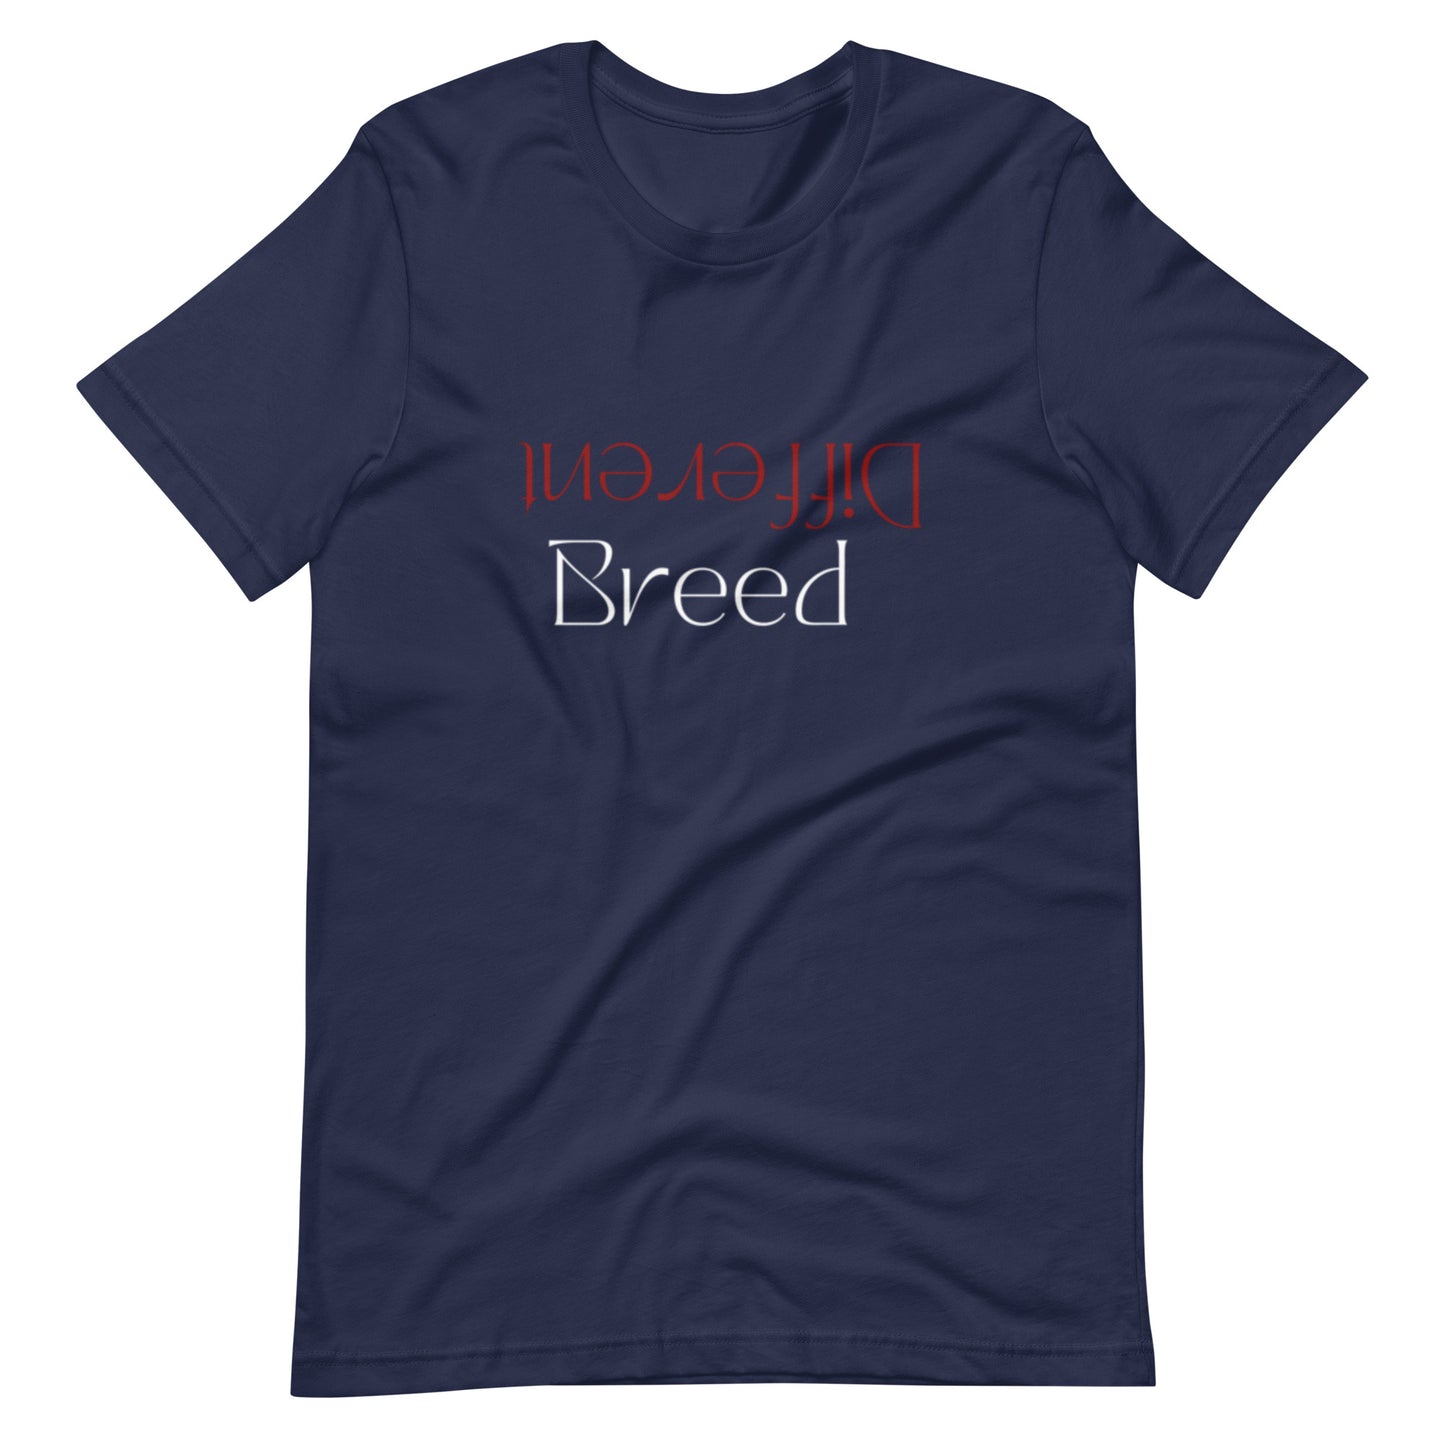 Different Breed T-shirt